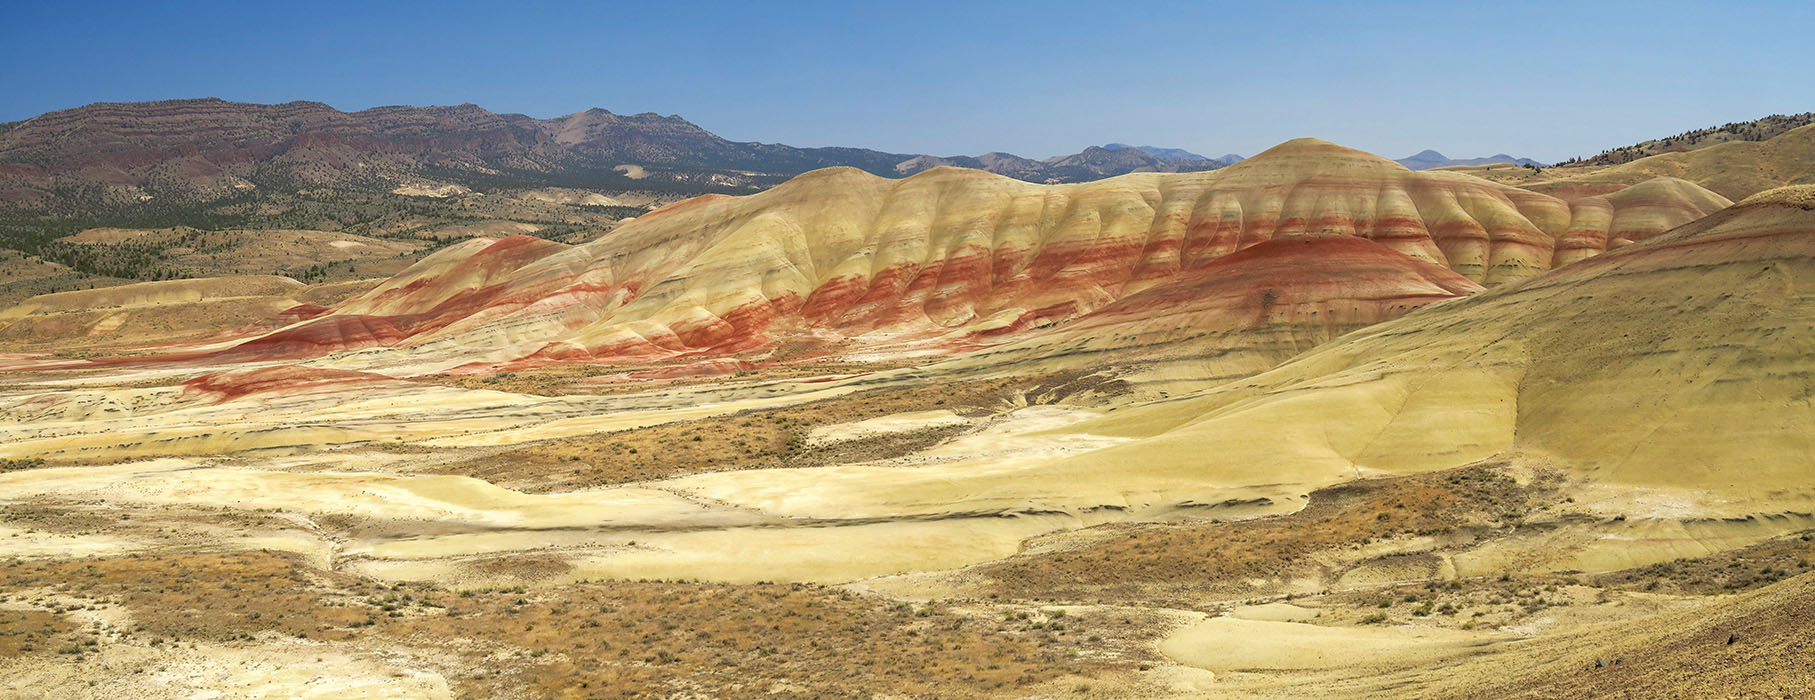 Painted Hills mini-panorama [Painted Hills Overlook, John Day Fossil Beds National Monument, Wheeler County, Oregon]